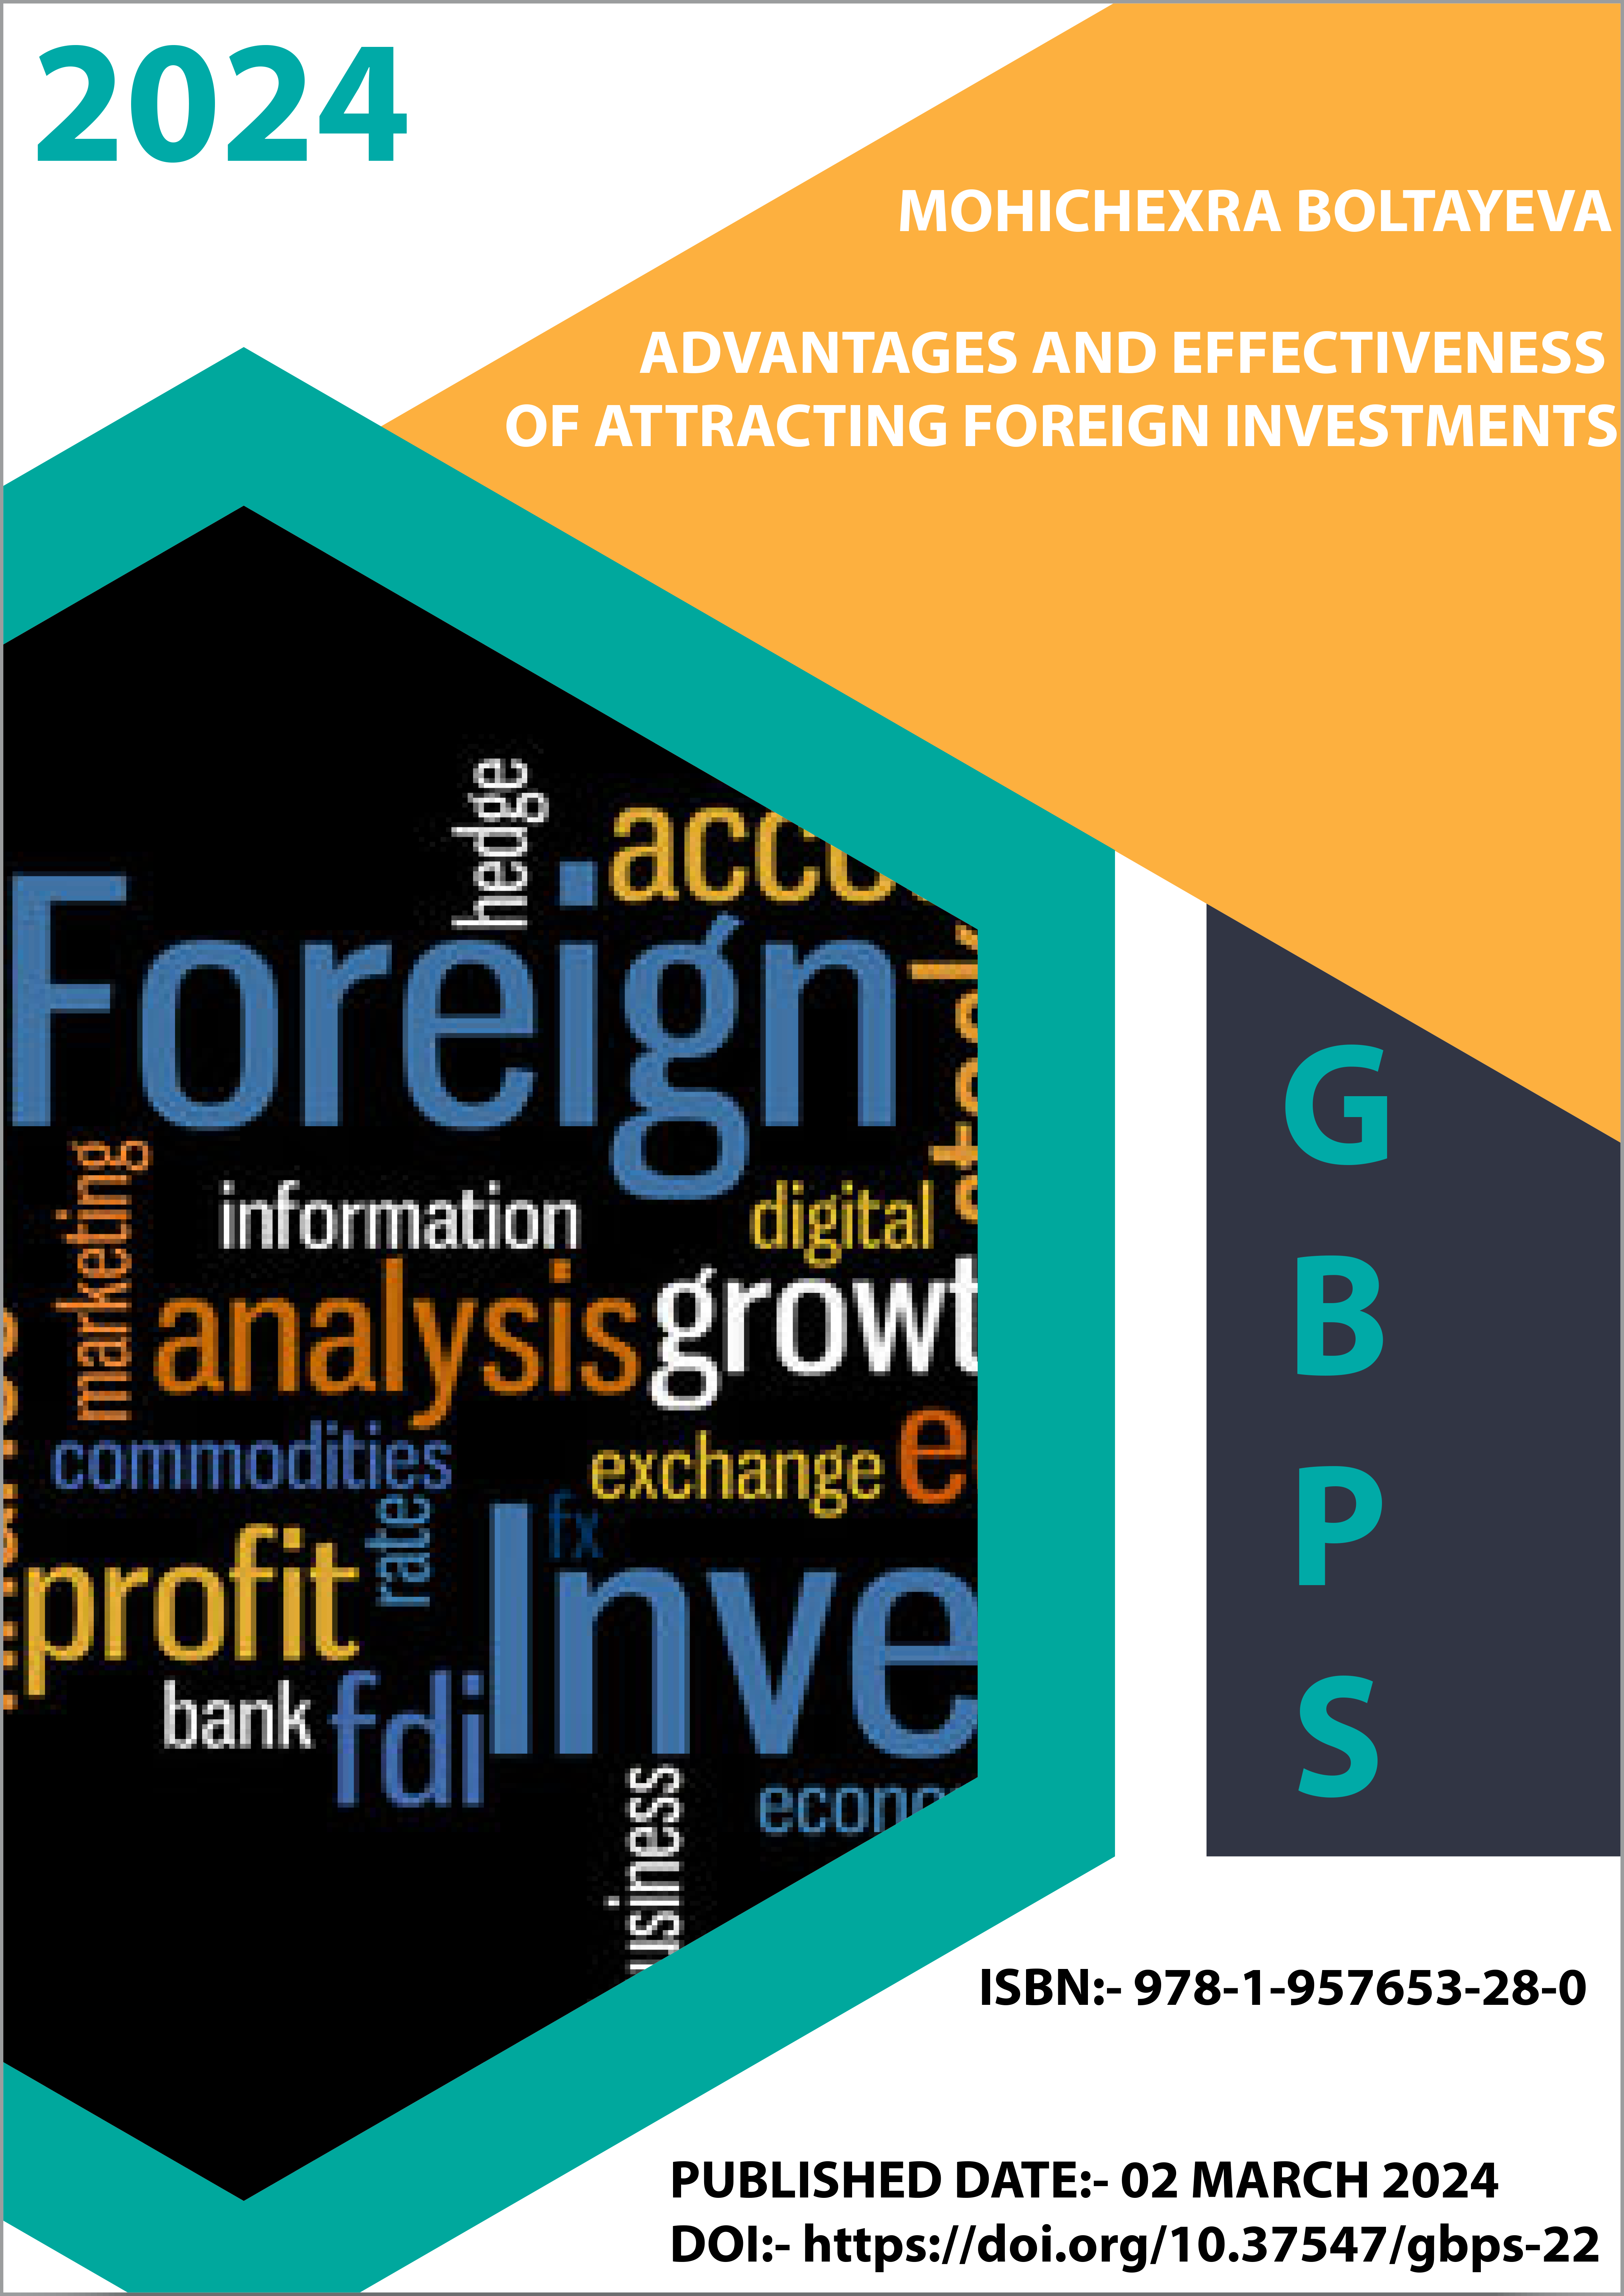 					View ADVANTAGES AND EFFECTIVENESS OF ATTRACTING FOREIGN INVESTMENTS
				